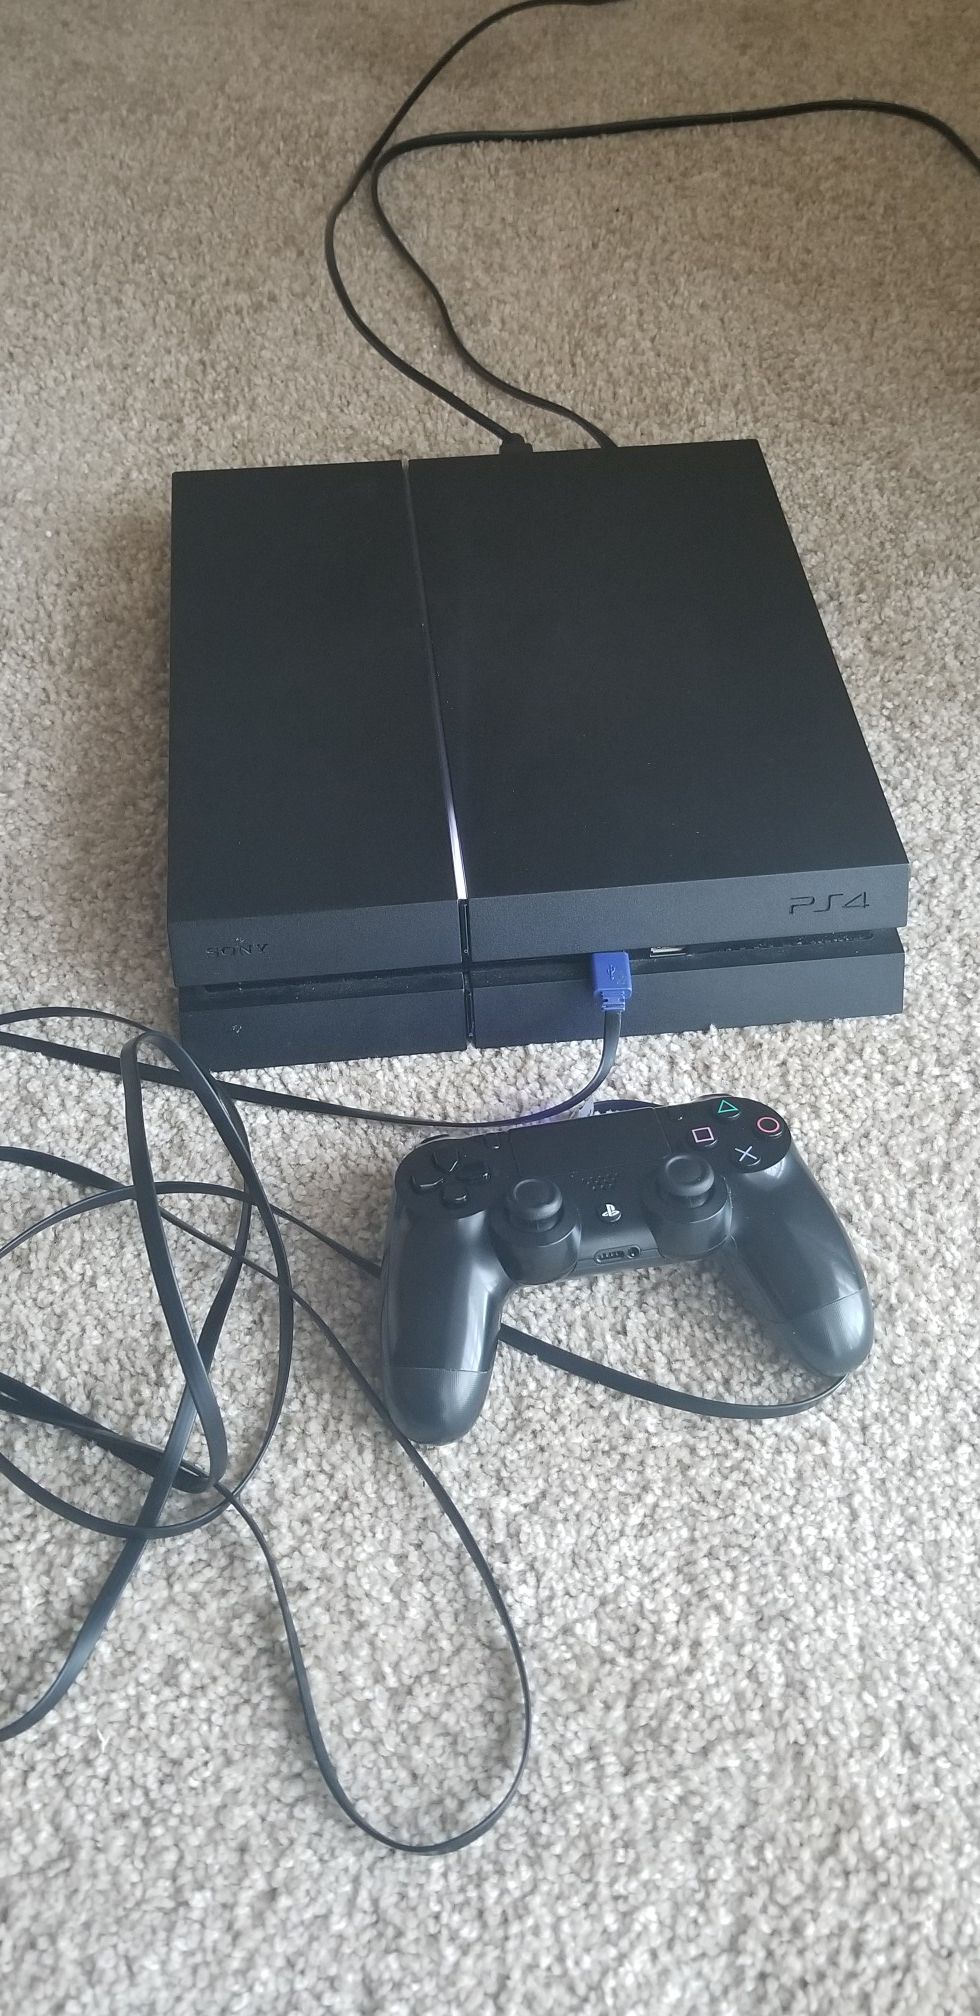 Black ps4 slim with 2k19 basketball game with controller